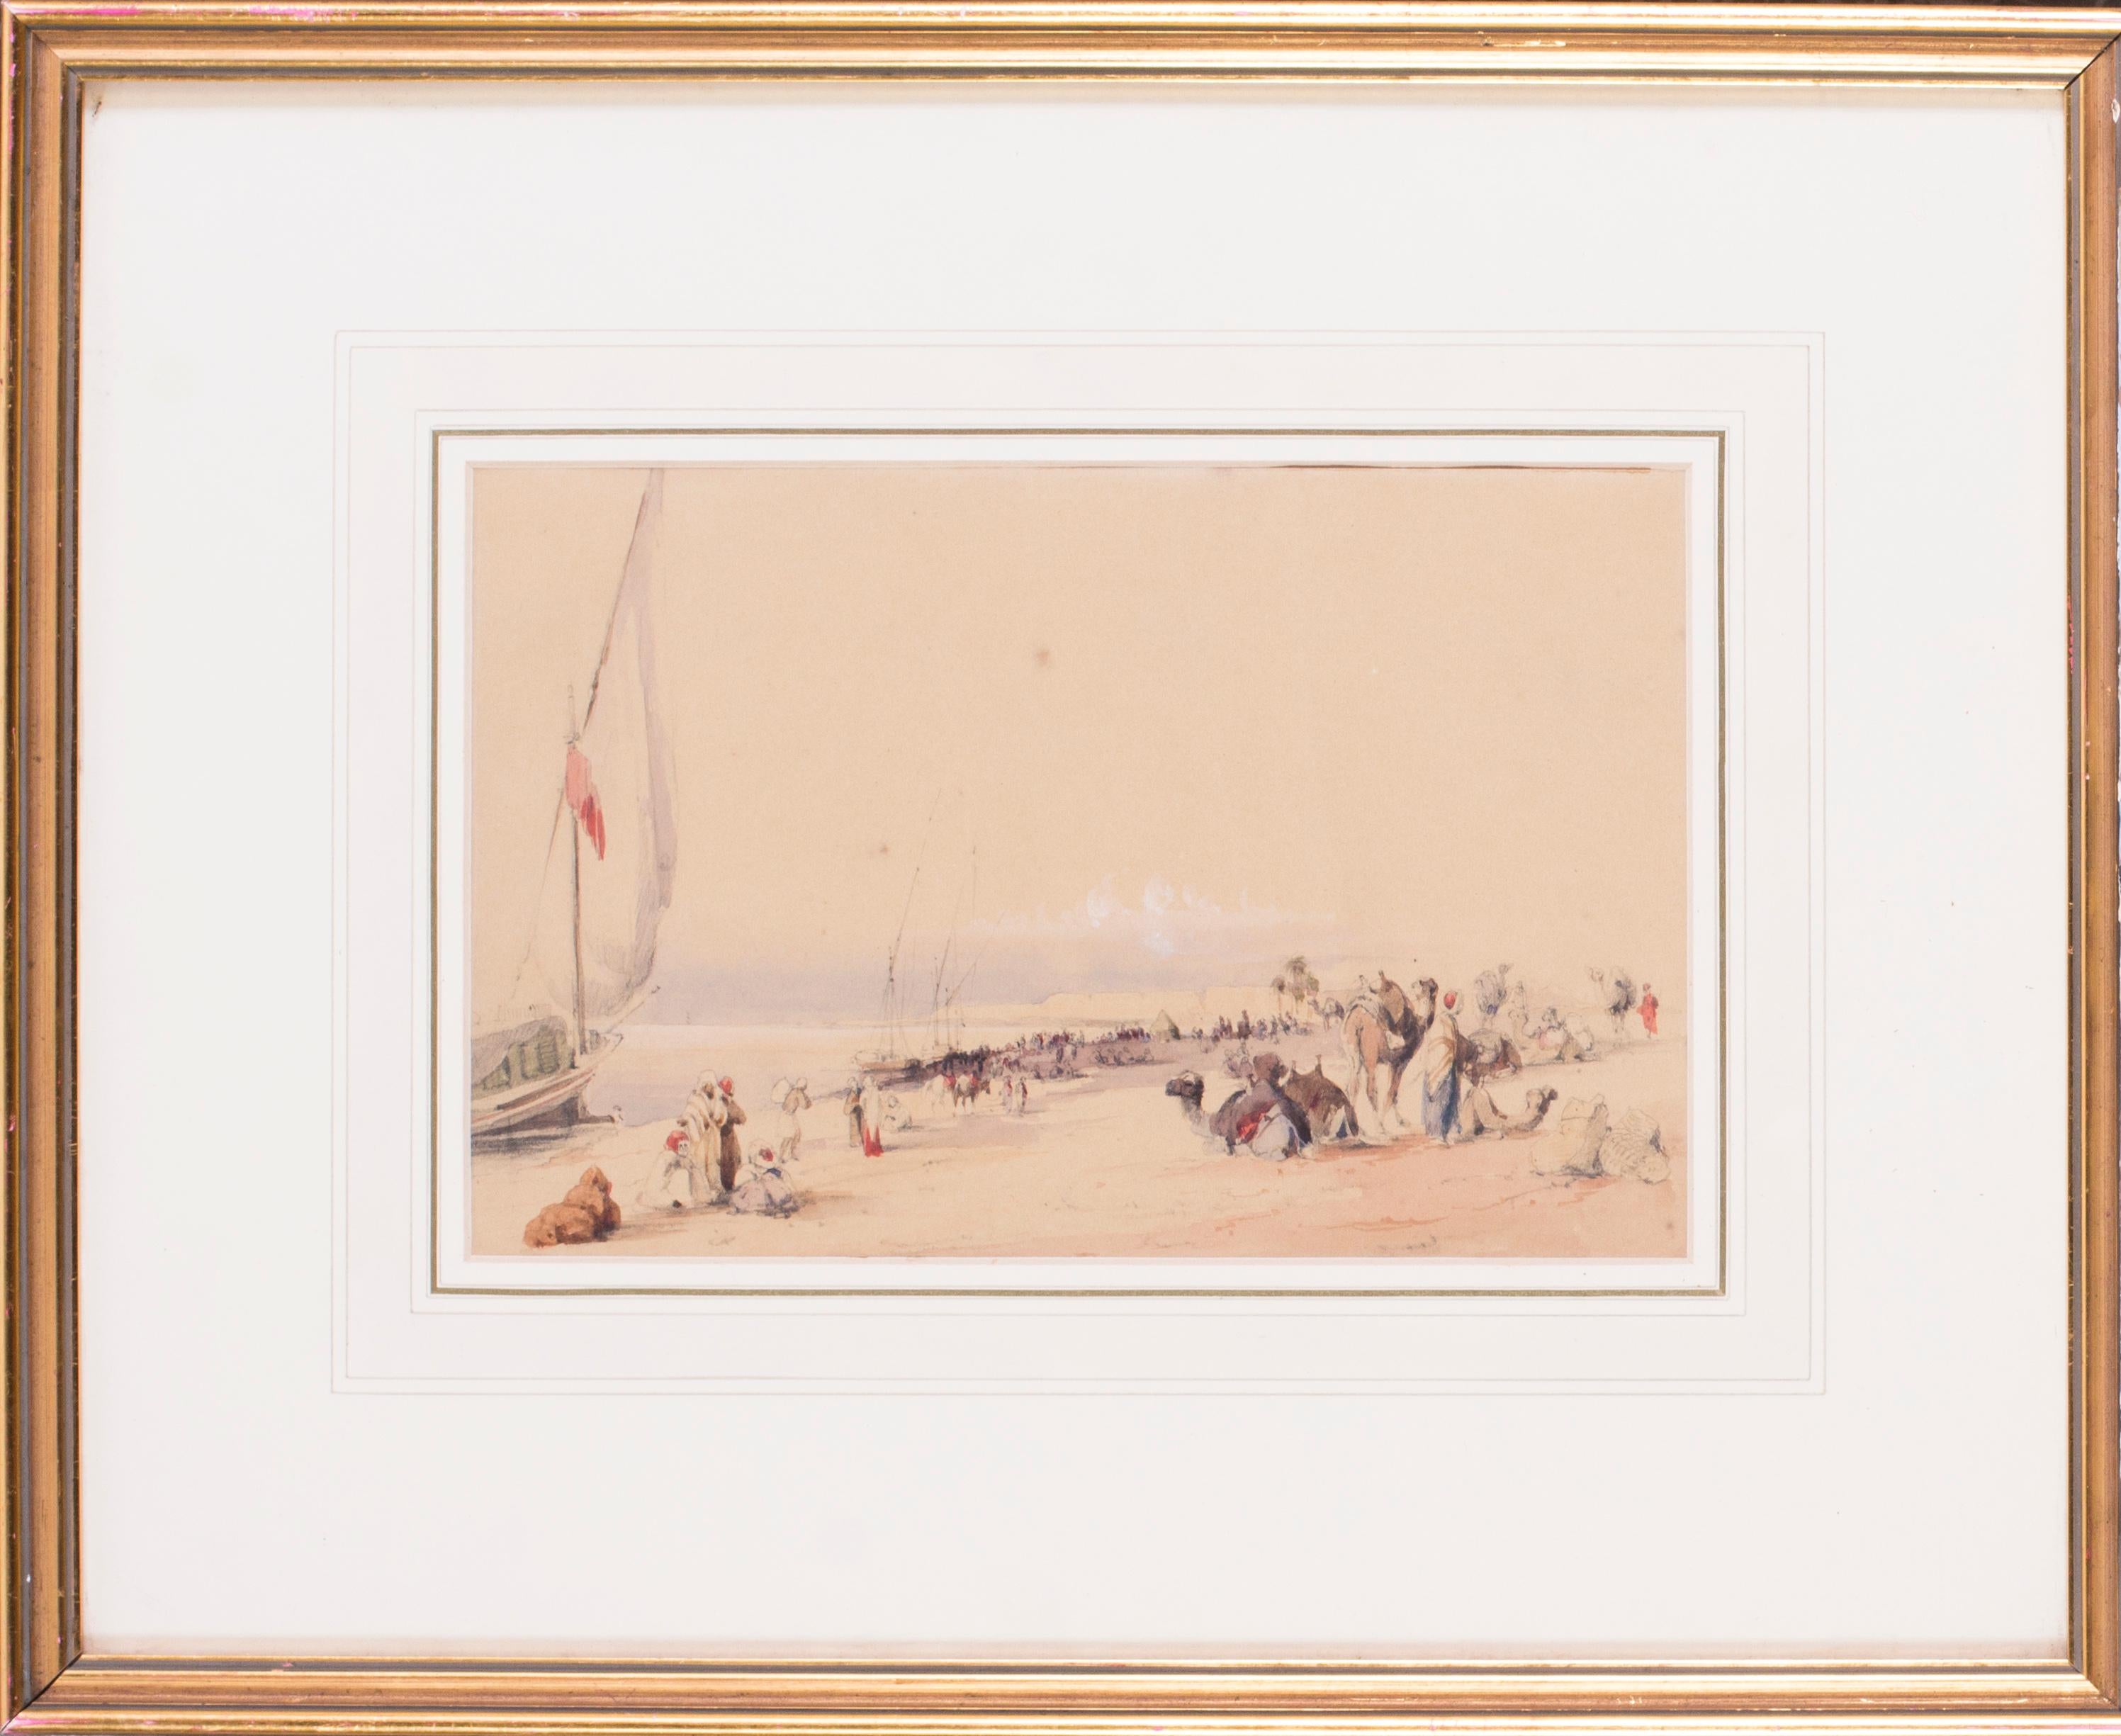 Mid 19th Century British watercolour of the Nile in Karnac, Luxor, Egypt